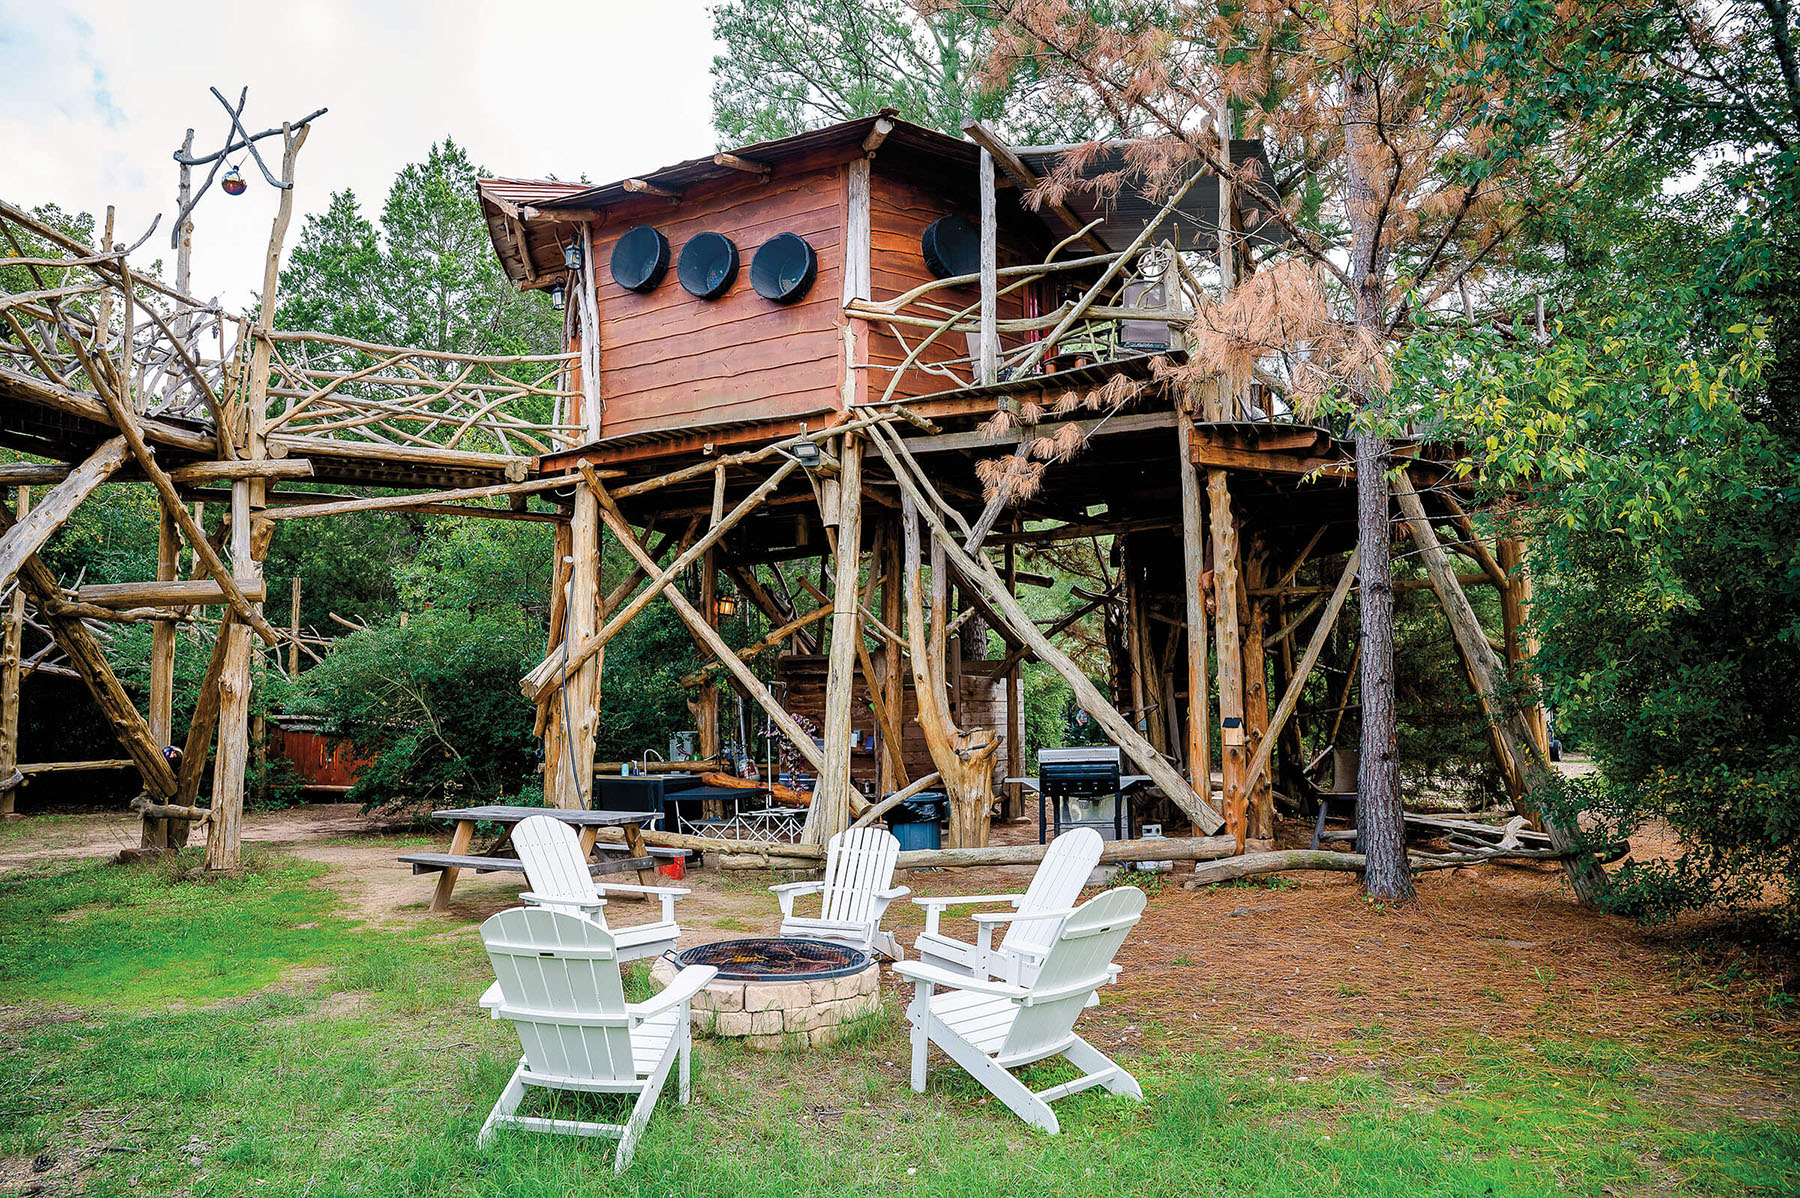 A treehouse built on tall wooden stilts, with white Adirondack chairs in the front 